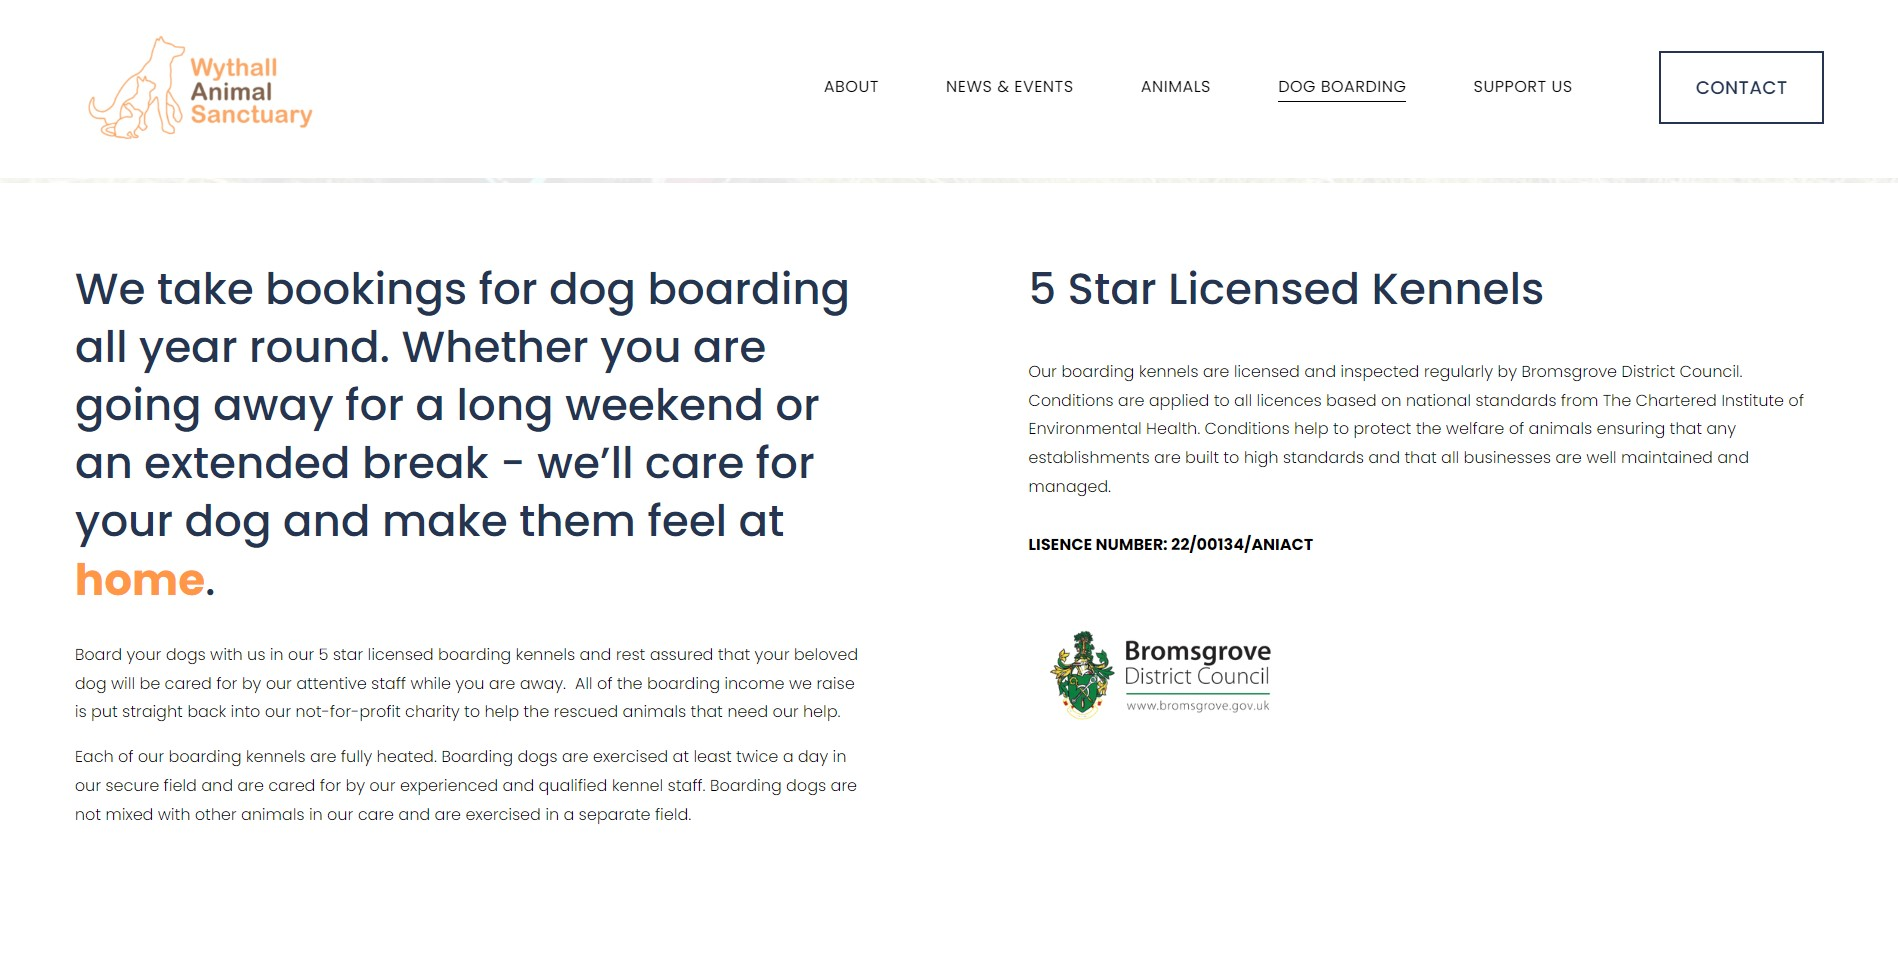 Wythall Animal Sanctuary website displays the boarding licence number